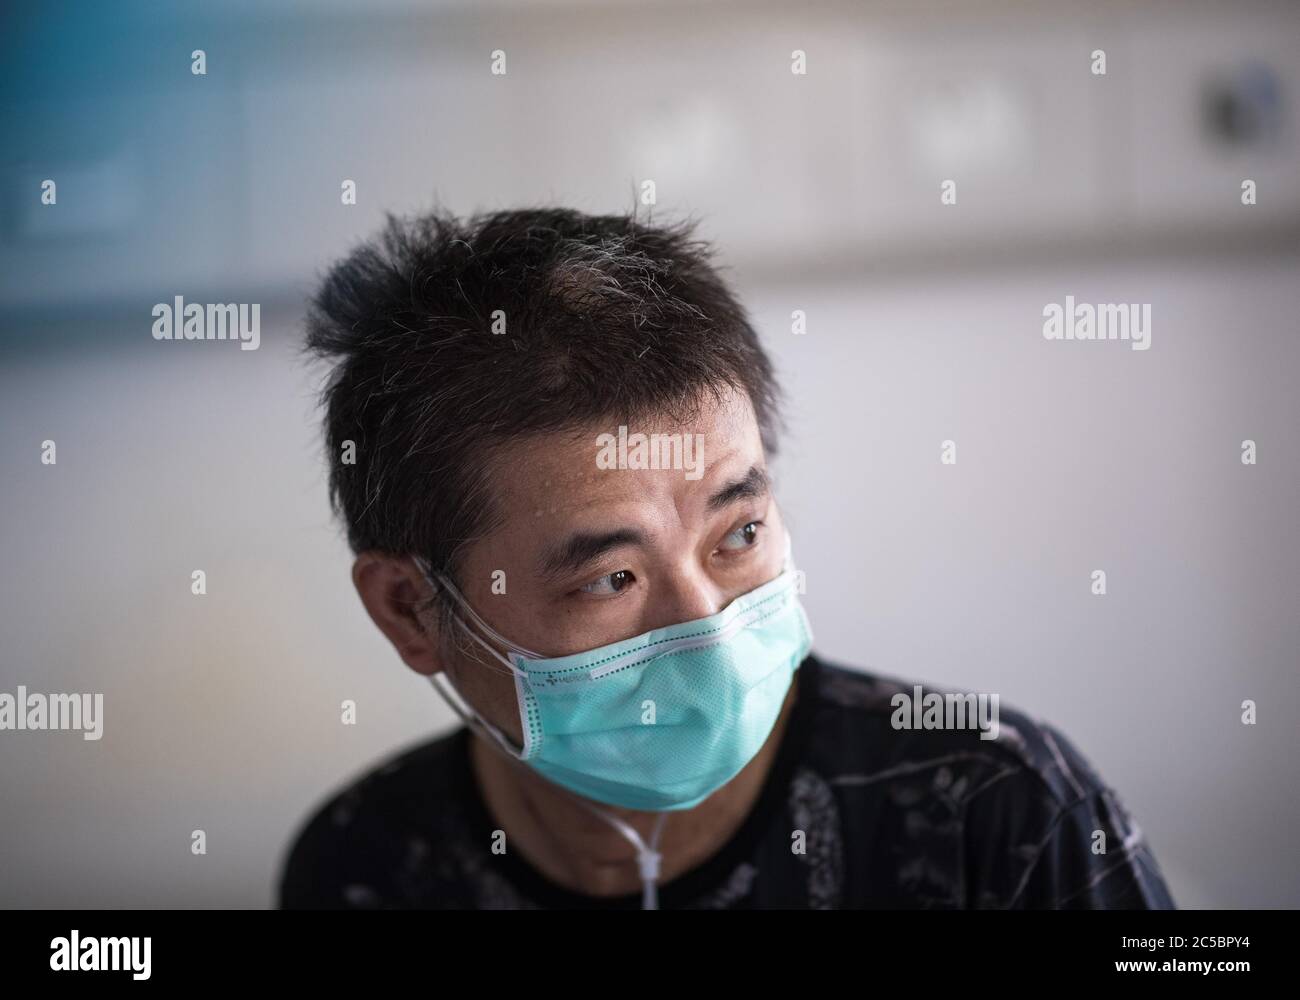 (200702) -- BEIJING, July 2, 2020 (Xinhua) -- Hu Dingjiang waits for discharge in a ward of Wuhan Pulmonary Hospital in Wuhan, central China's Hubei Province, June 17, 2020. Hu, a 40-year-old recovered COVID-19 patient, was discharged from the hospital on Wednesday. He was diagnosed with the disease in early February, and was hospitalized in the ICU ward as one of the 81 severe cases in the hospital. The functions of his lungs recovered on April 5 with 40 days of extracorporeal membrane oxygenation (ECMO) support. Then he received rehabilitation training in the hospital. (Xinhua/Xiao Yijiu) Stock Photo